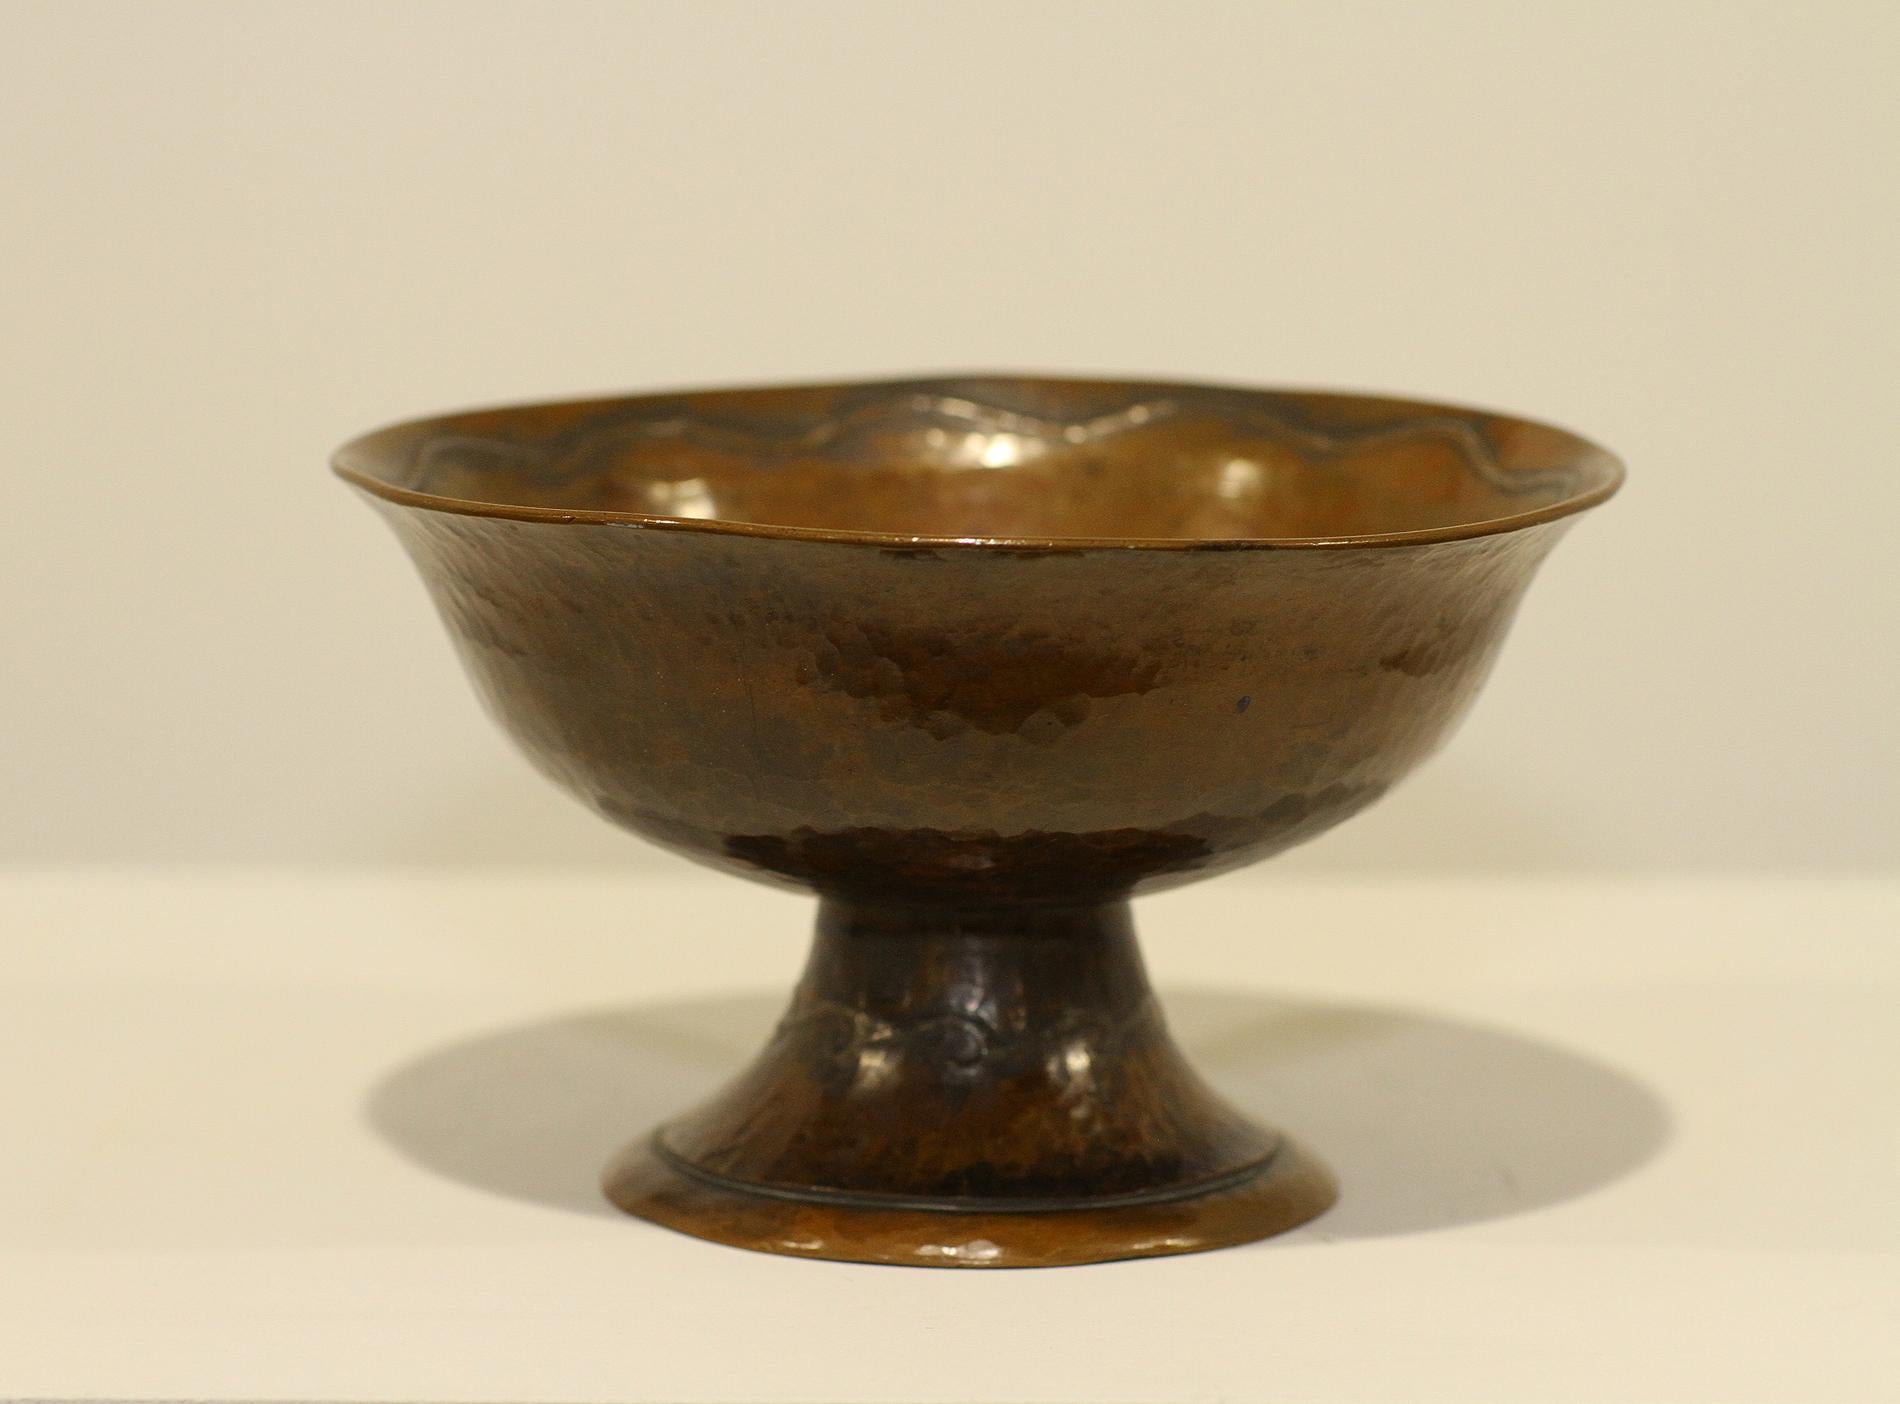 Jean Serriere, Hammered Copper and Silver Bowl, 1922-1925 For Sale 2